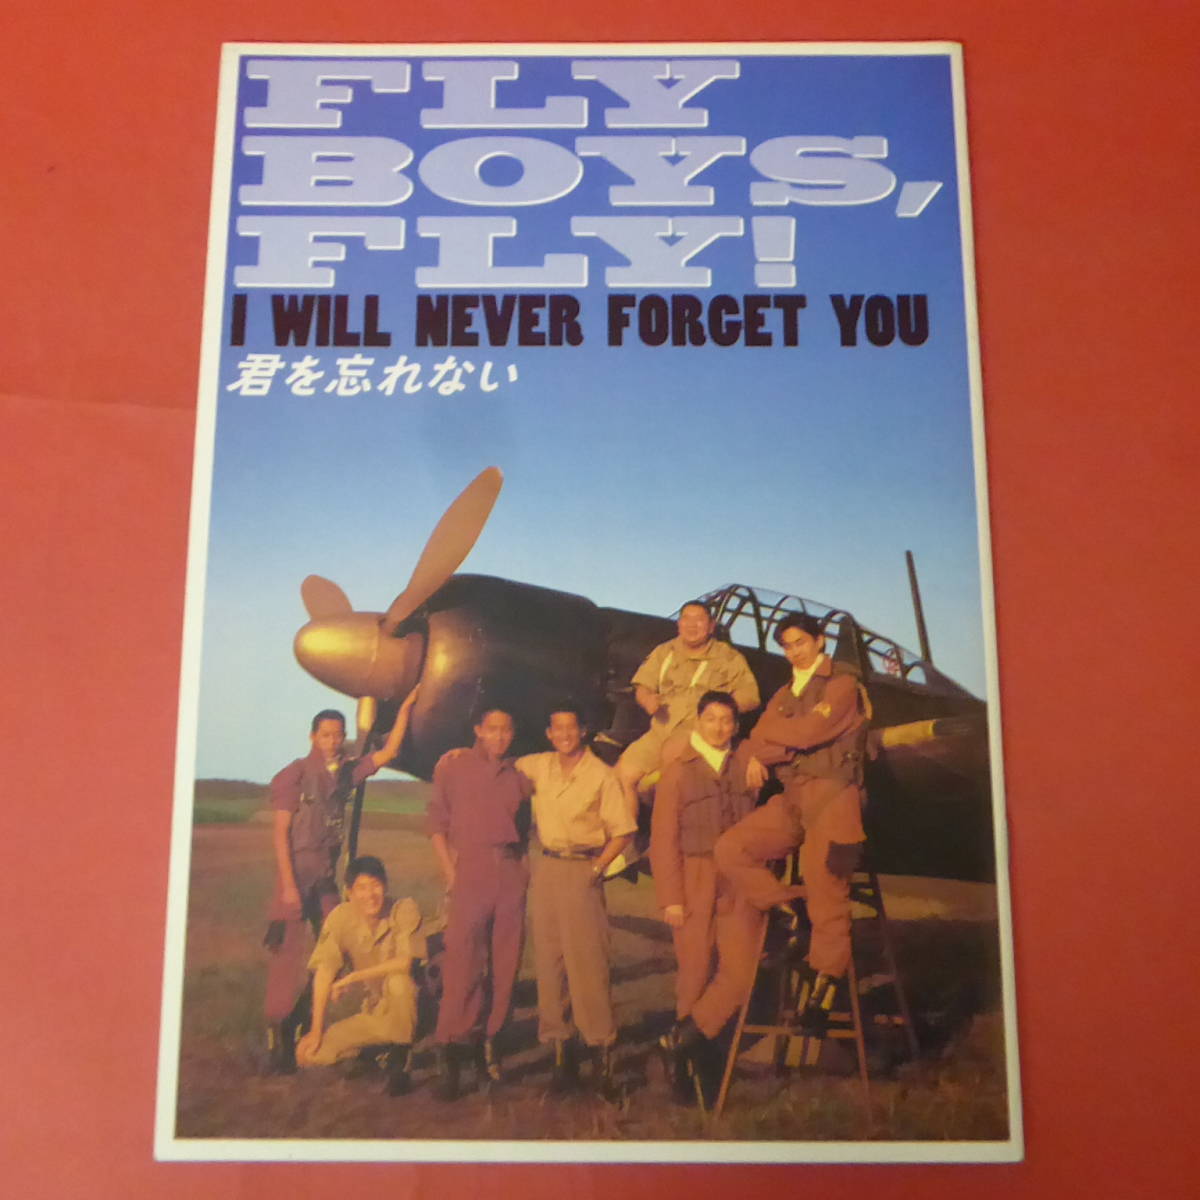 Q5-221012☆君を忘れない FLY BOYS, FLY! I WILL NEVER FORCET YOU  映画パンフレットの画像1